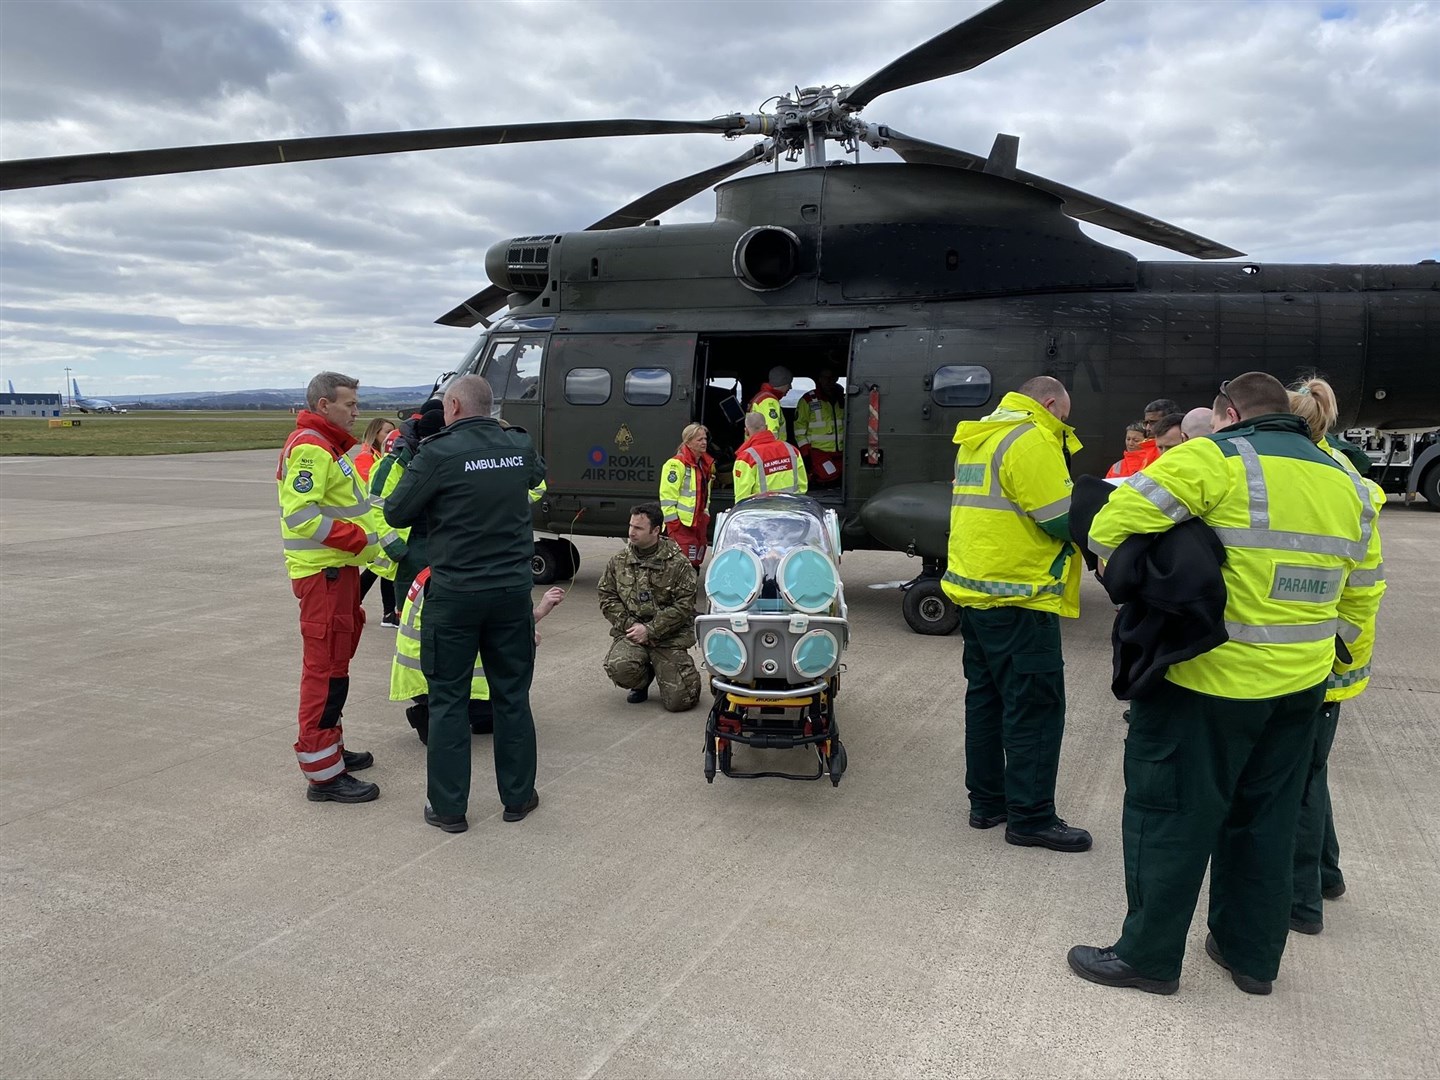 Puma crews work with Paramedics and Doctors from the Scottish Ambulance Service and NHS Scotland to understand best practice in how the Puma helicopter can support their life-saving efforts when using the new EpiShuttle isolation stretcher...RAF Puma helicopters based at Kinloss Barracks in Moray have been supporting the Scottish Ambulance Service with the trials of the EpiShuttle medical isolation and transportation system as part of the Scottish Government’s coronavirus response..